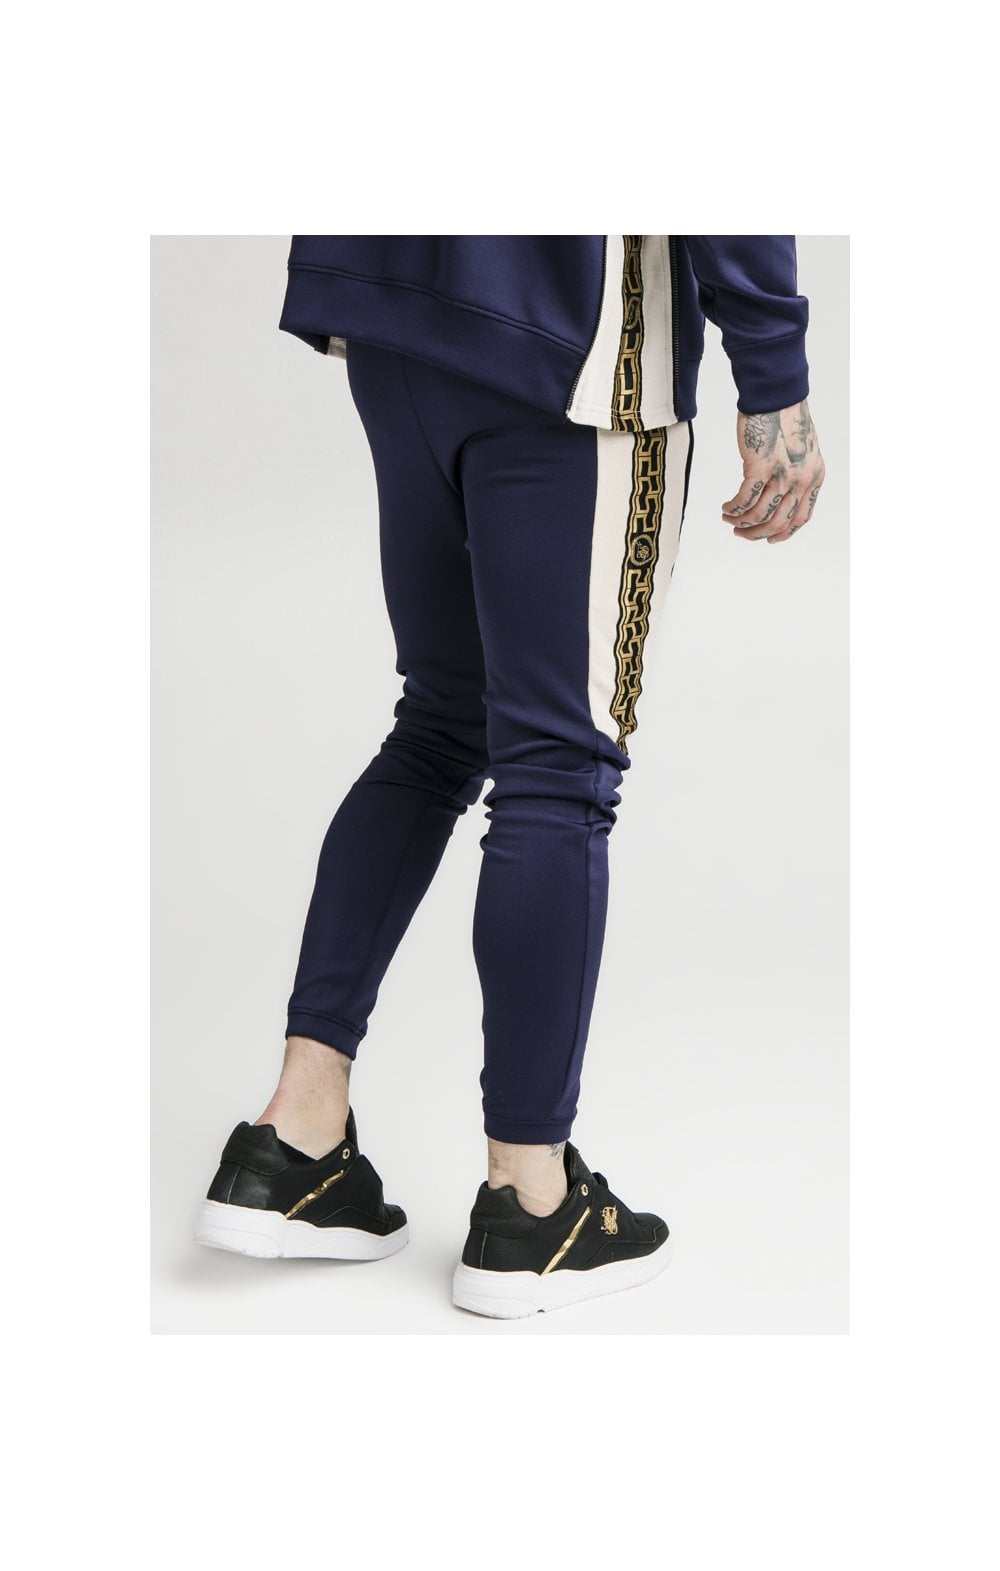 Load image into Gallery viewer, SikSilk hybrid Panel Taped Pants – Navy (3)